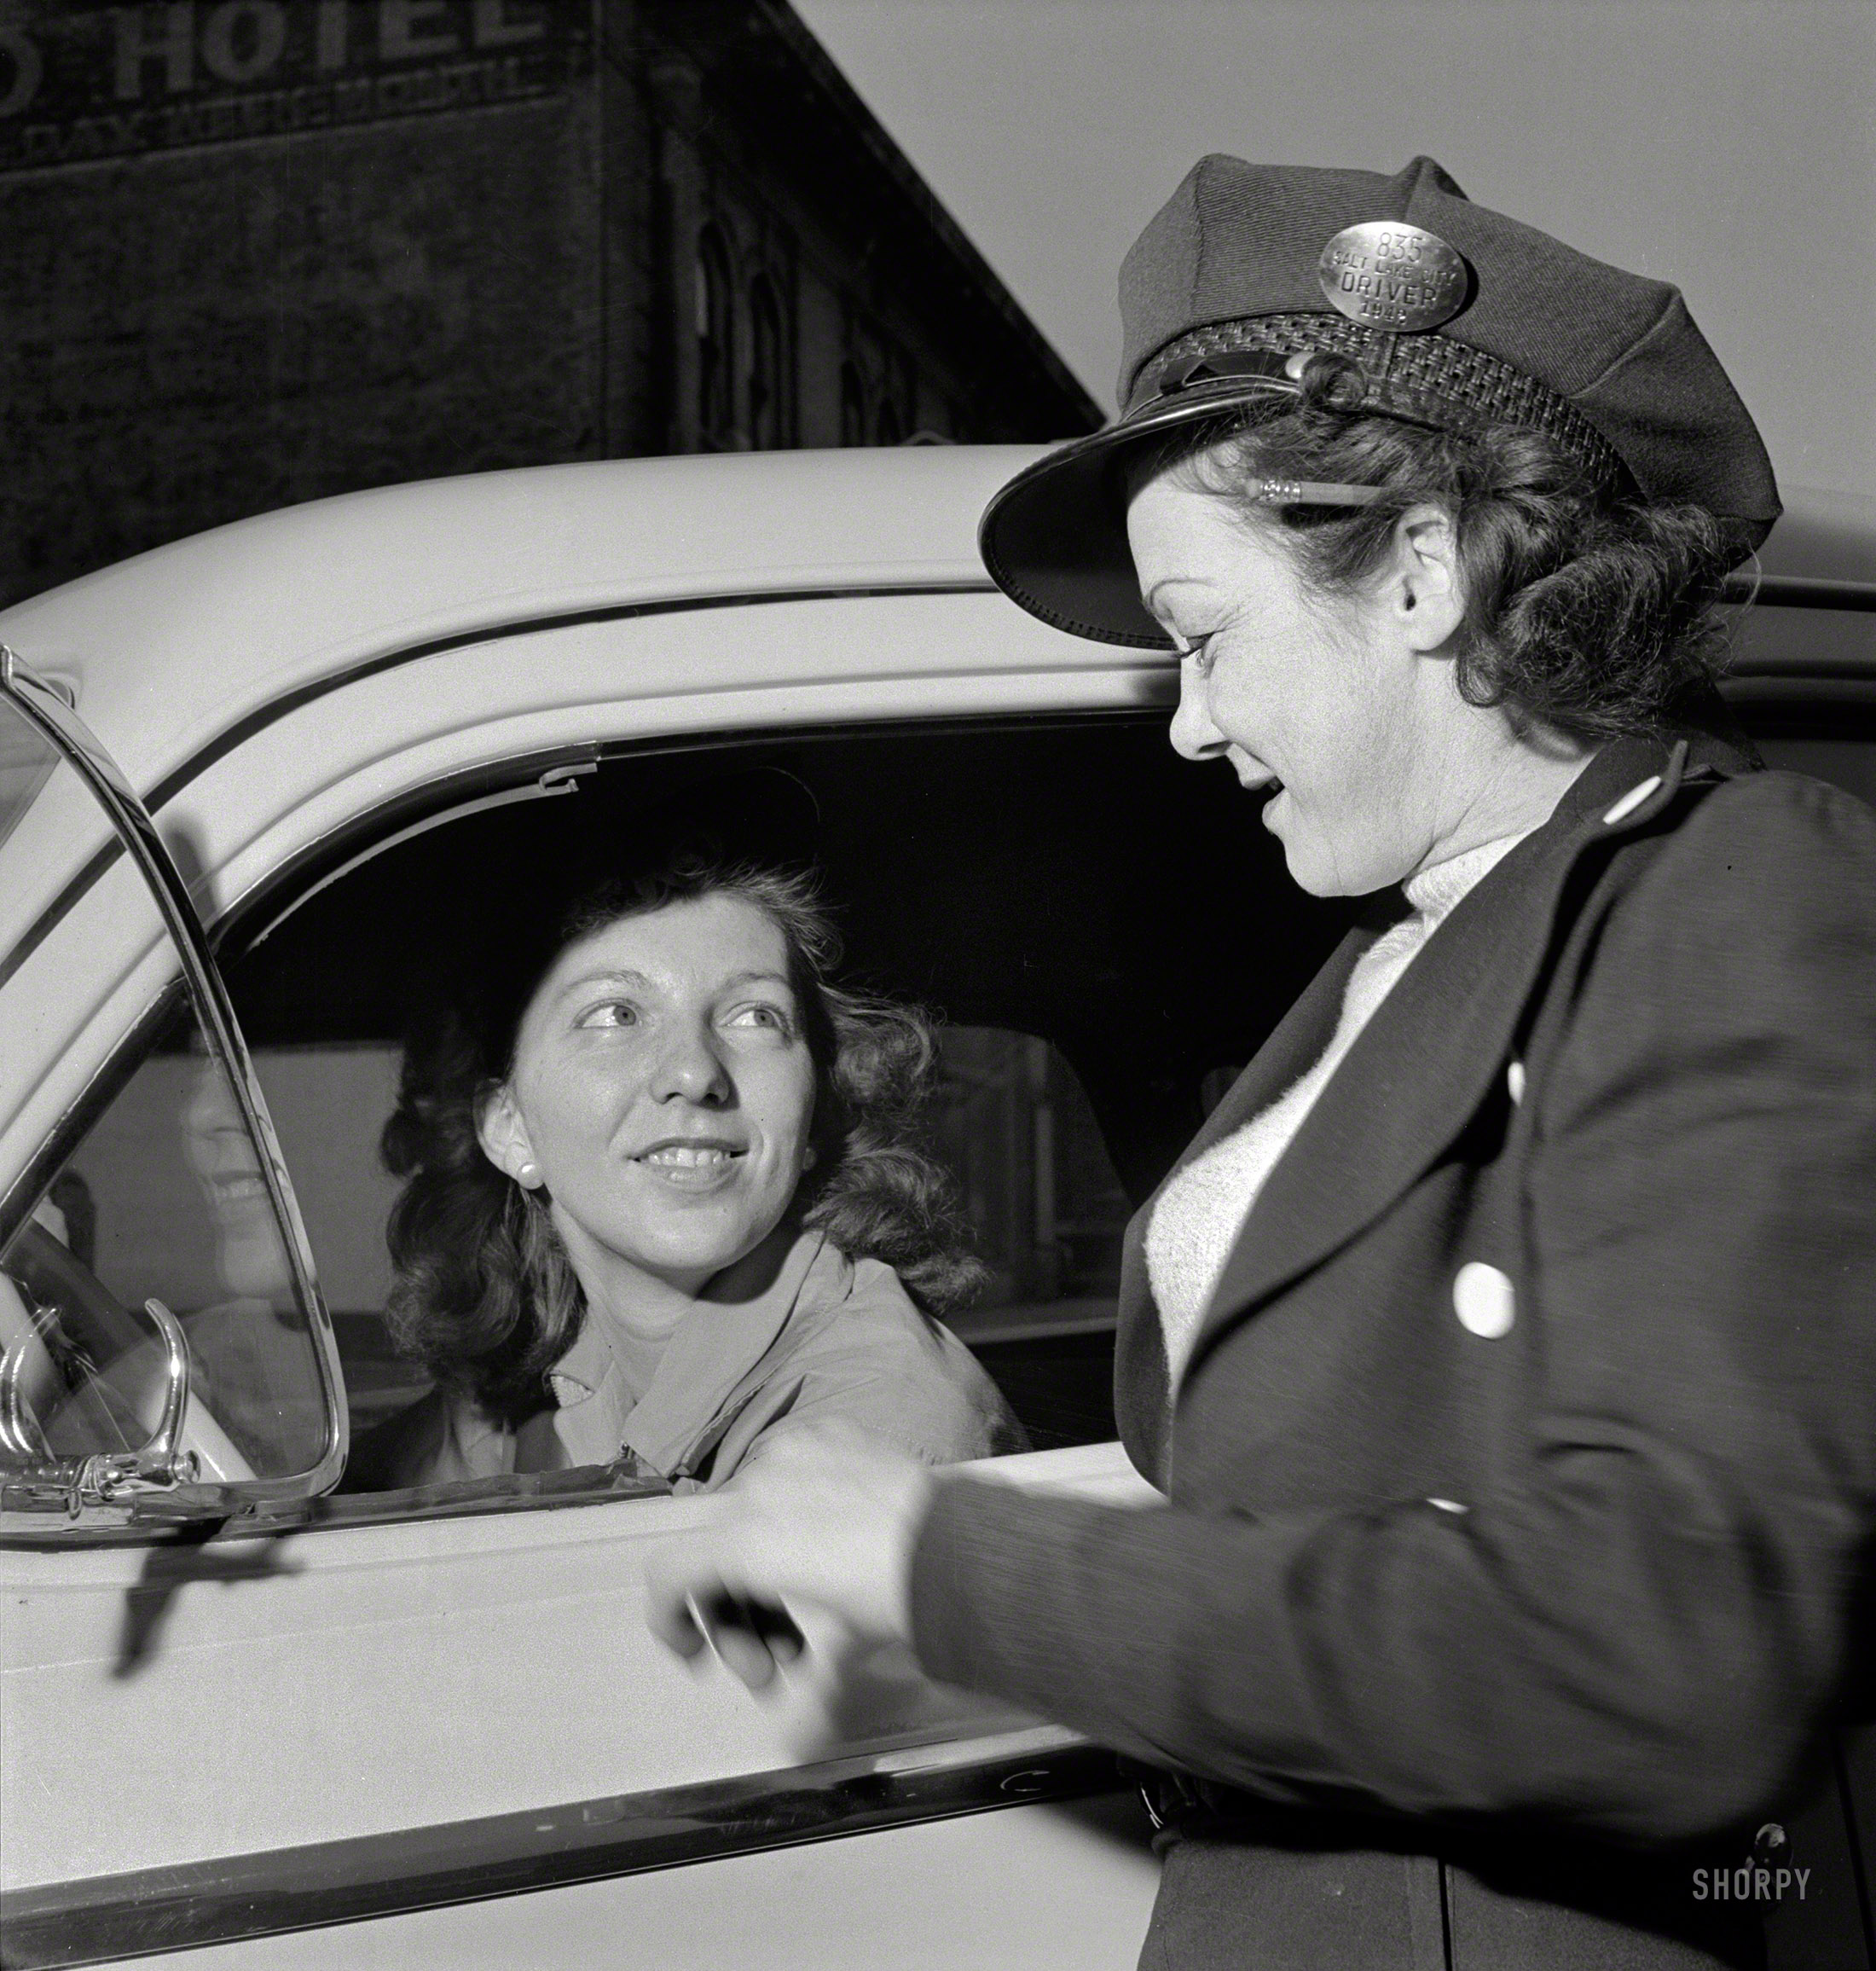 November 1942. Salt Lake City, Utah. "Training women to operate buses and taxicabs." Lesson 1: Position pencil over ear. Tip cap at jaunty angle. Crack gum. Photo by Andreas Feininger for the Office of War Information. View full size.